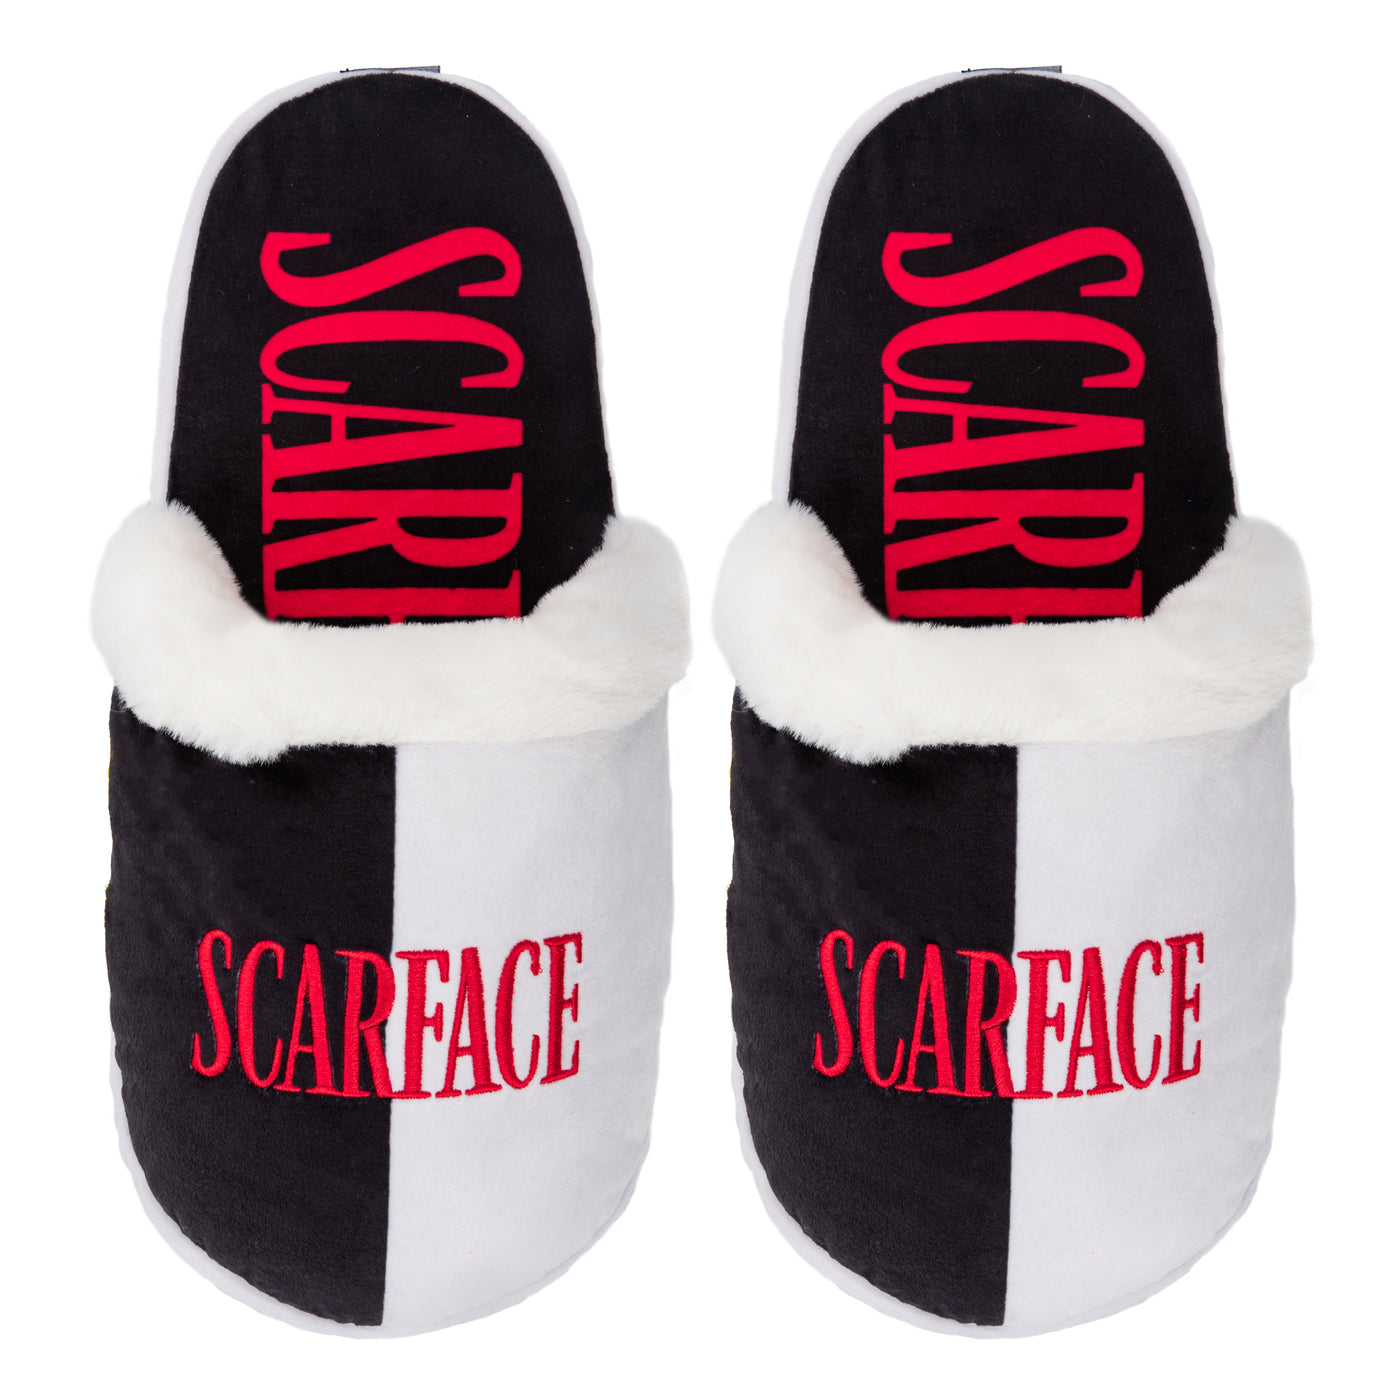 Scarface Slippers